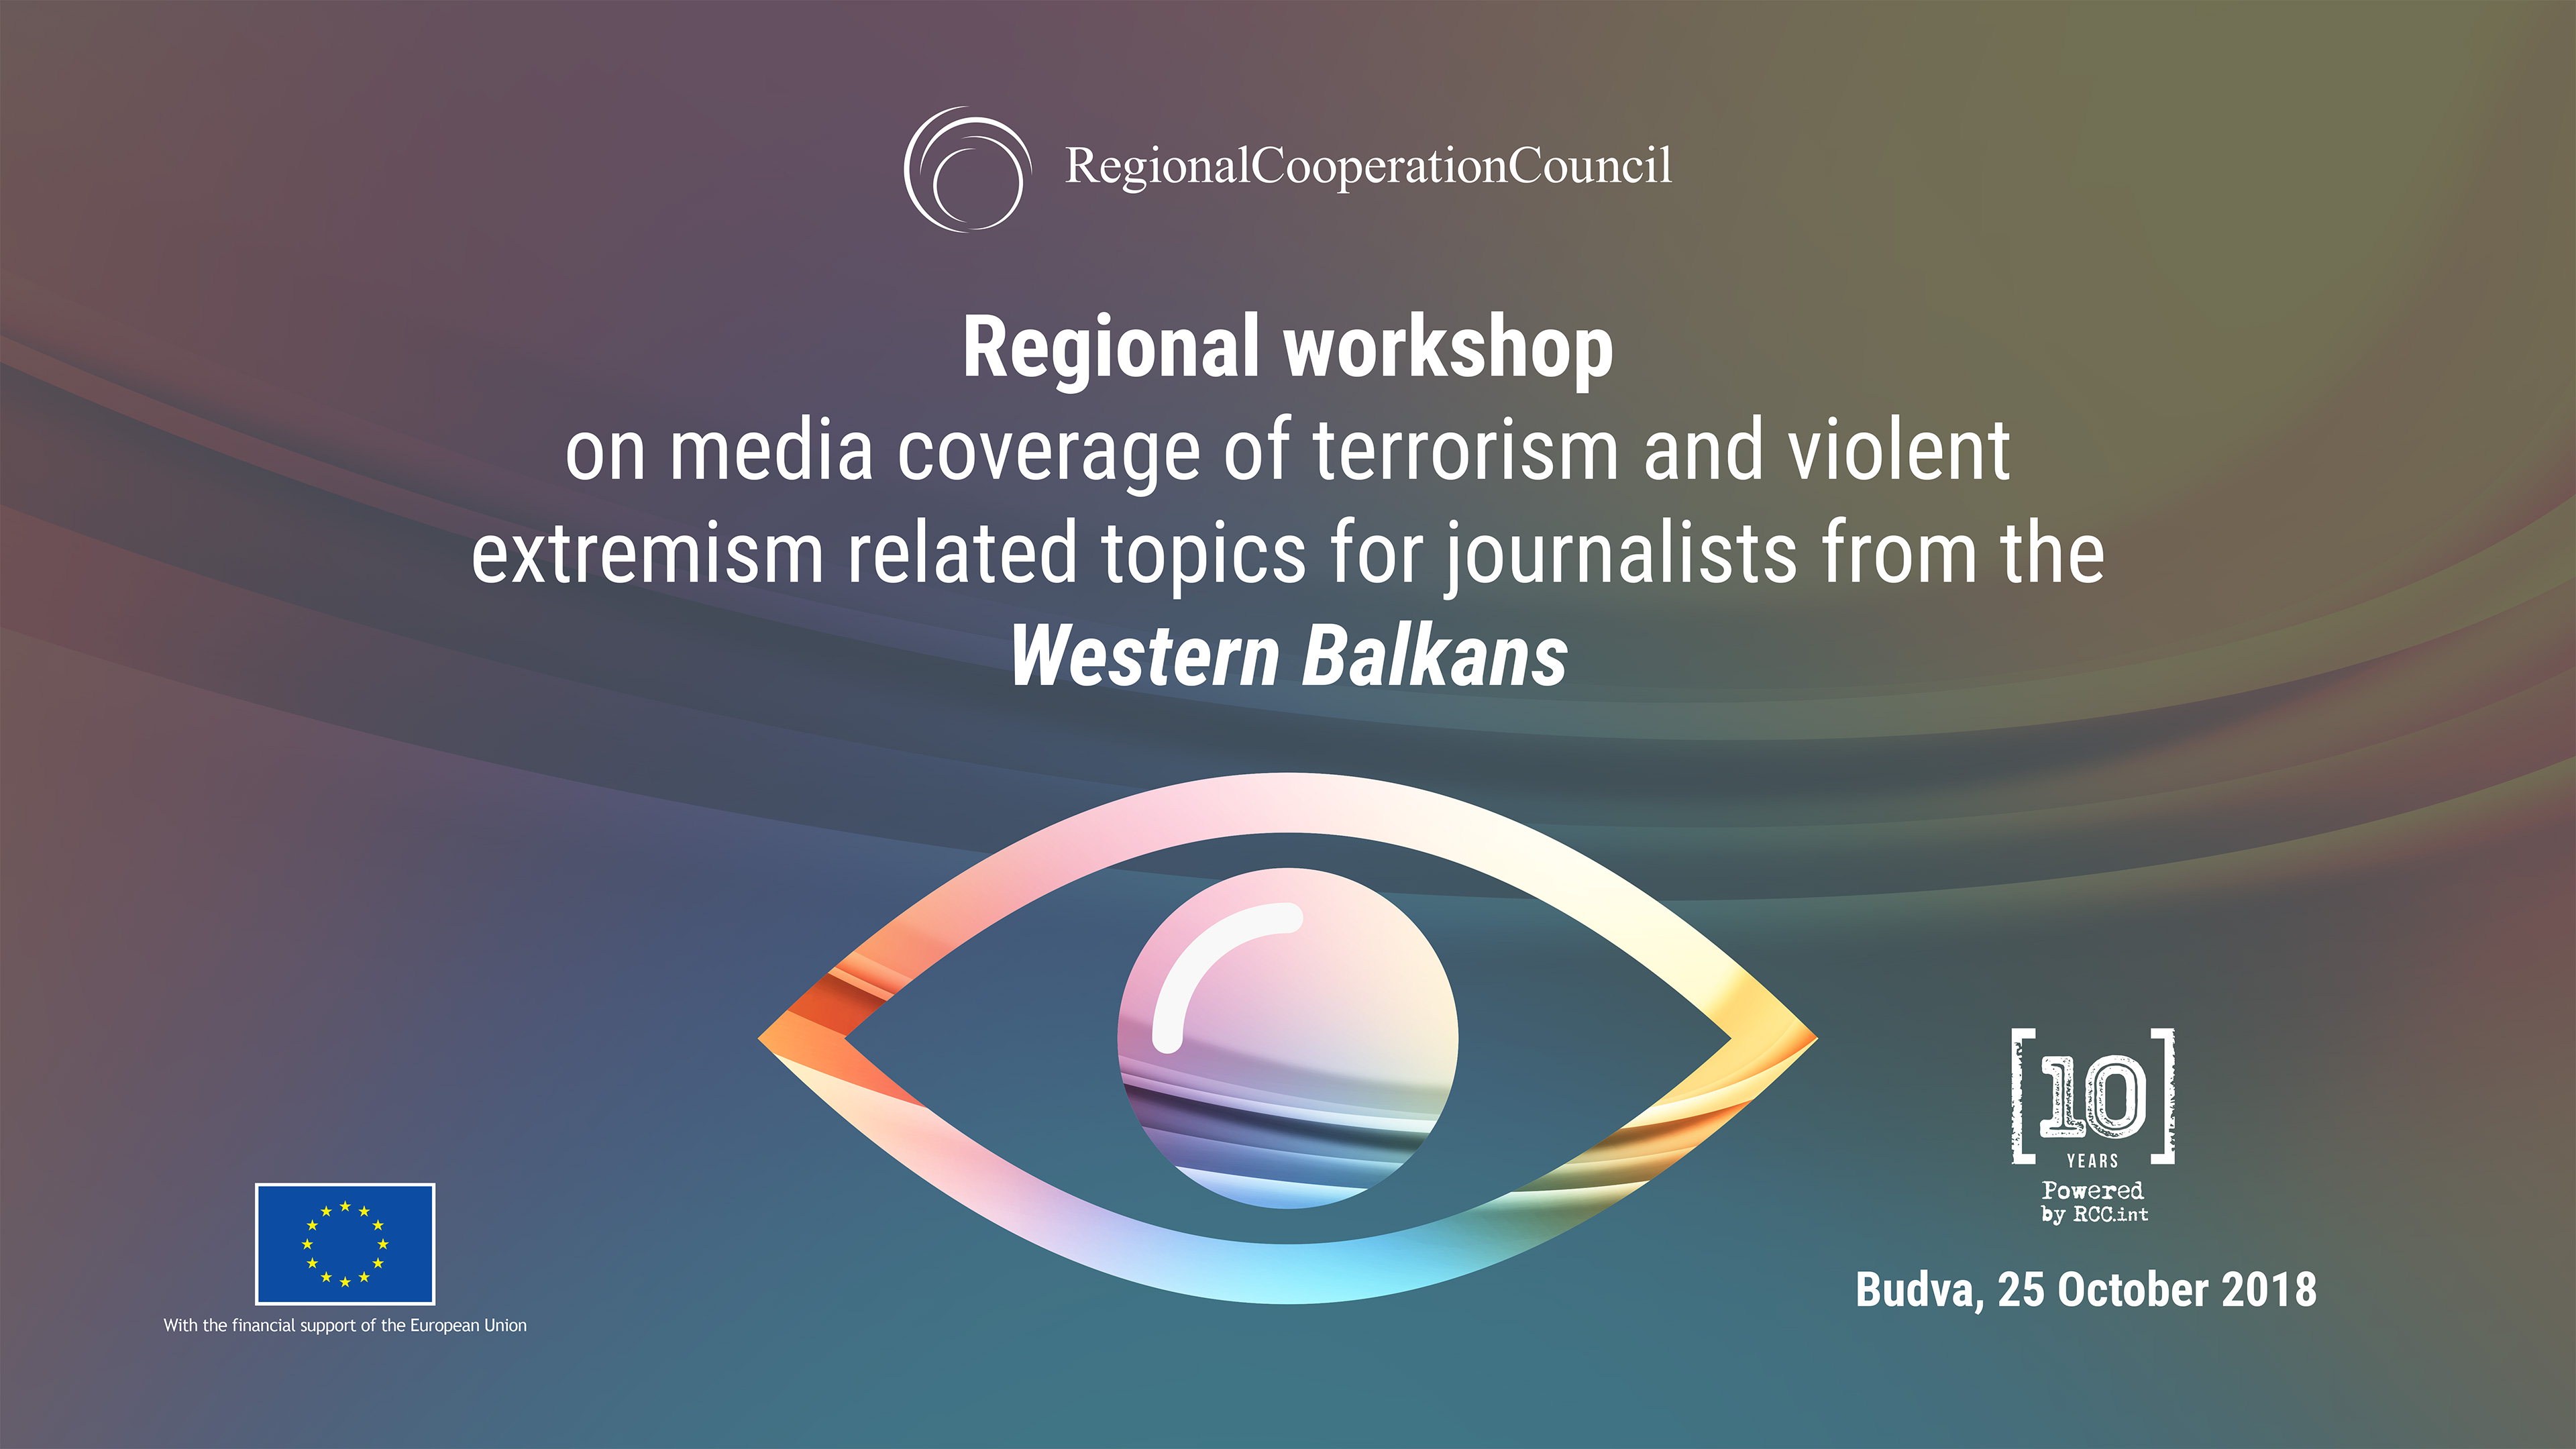 The Regional Cooperation Council (RCC) is organising a Regional Workshop on media coverage of violent extremism-related topics for journalists from the Western Balkans, on 25 October 2018, in Budva, Montenegro. (Illustration: RCC/Sejla Dizdarevic)